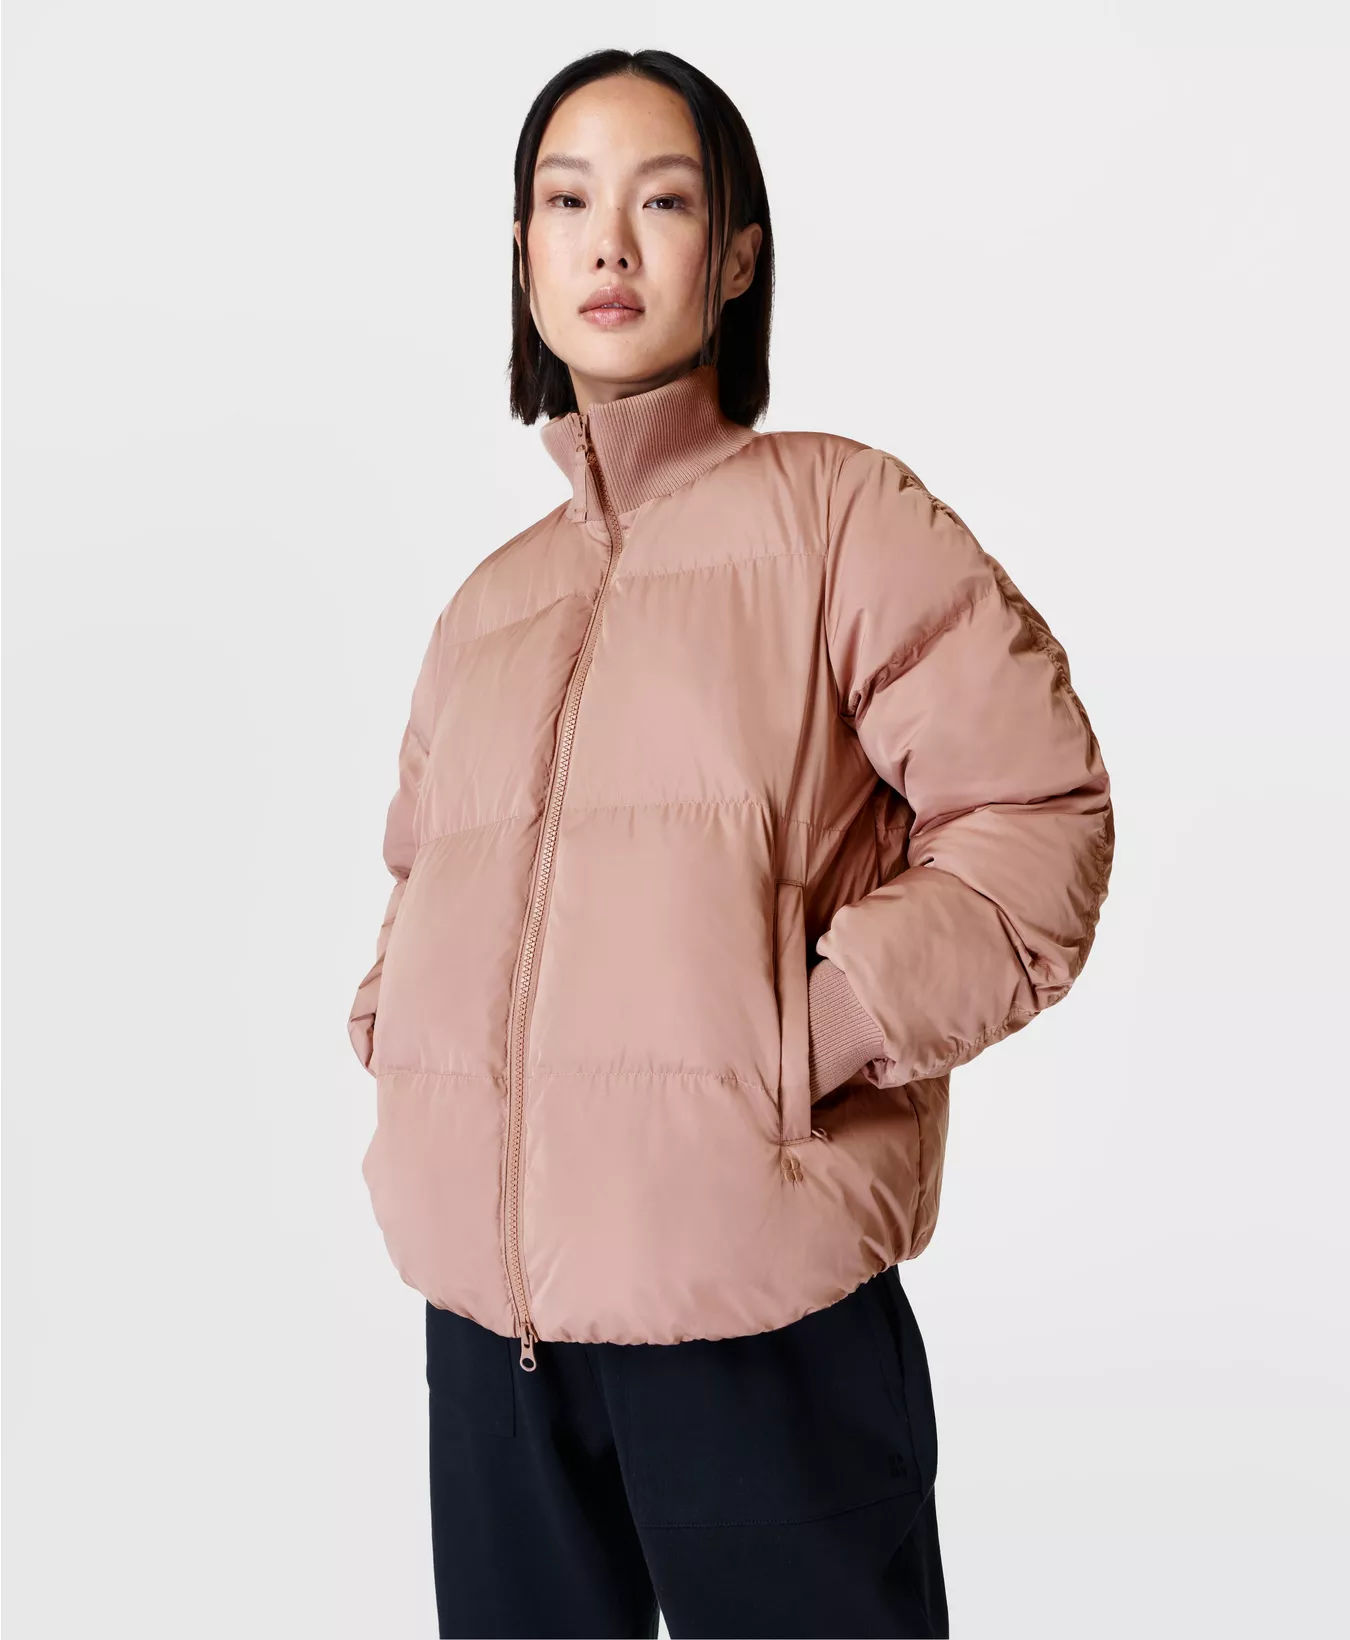 10. Sweaty Betty Quilted Short Jacket